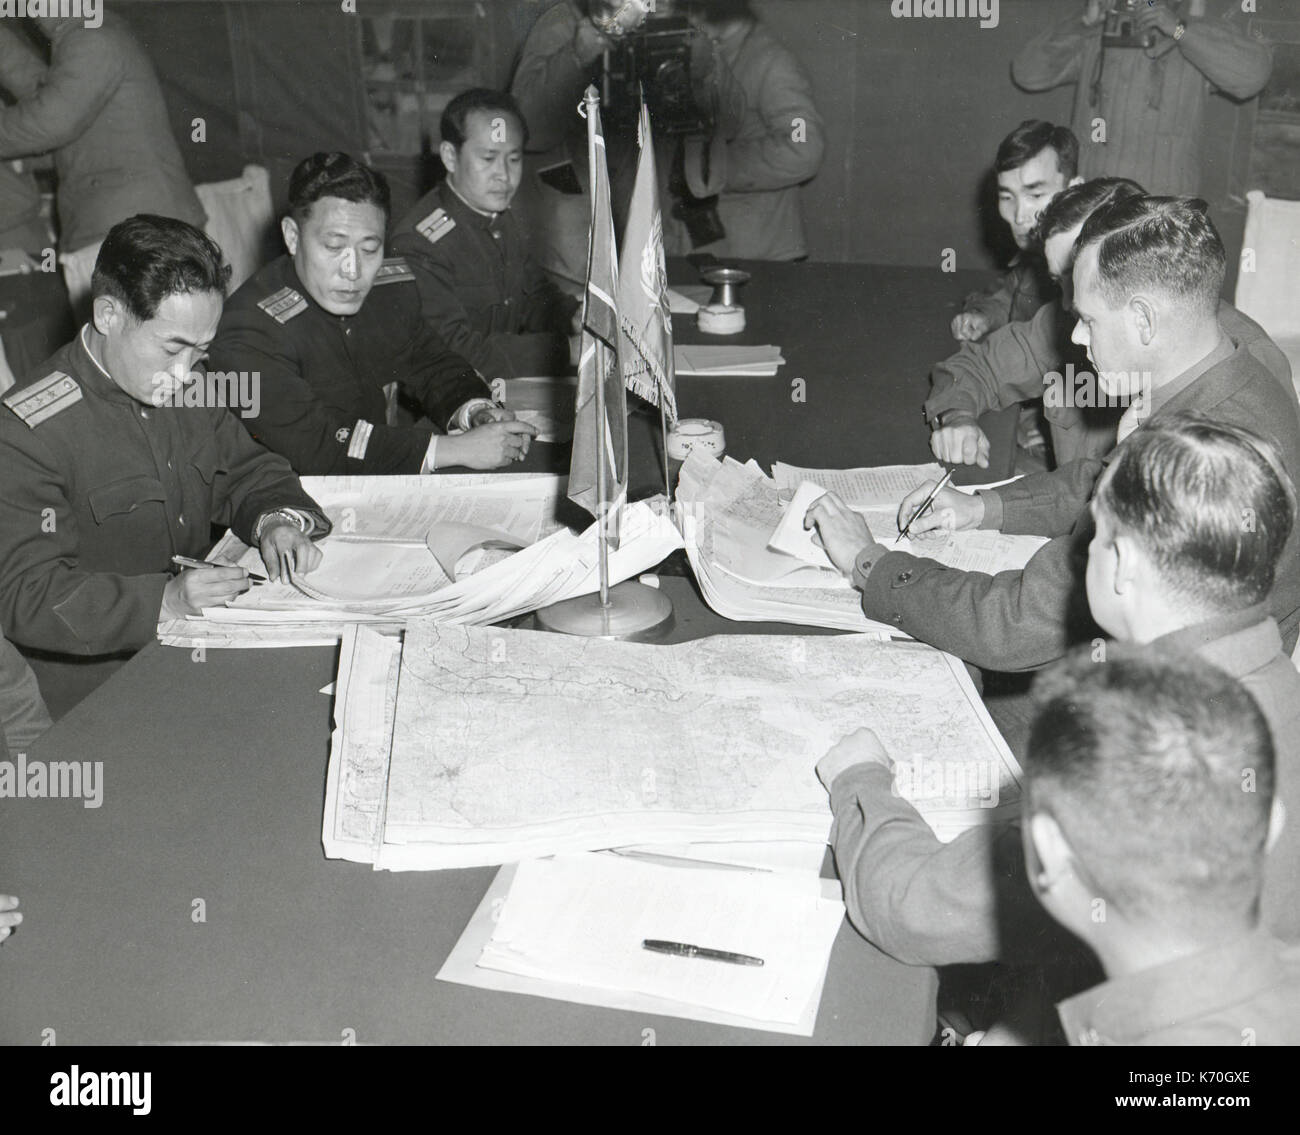 Panmunjom, Korea - Col. James C. Murray, Jr., USMC (rt) and Col Chang Chun San, of the North Korean Communist Army (left) initial maps showing the North and South boundaries of the Demarcation Zone, during cease fire talks. Stock Photo